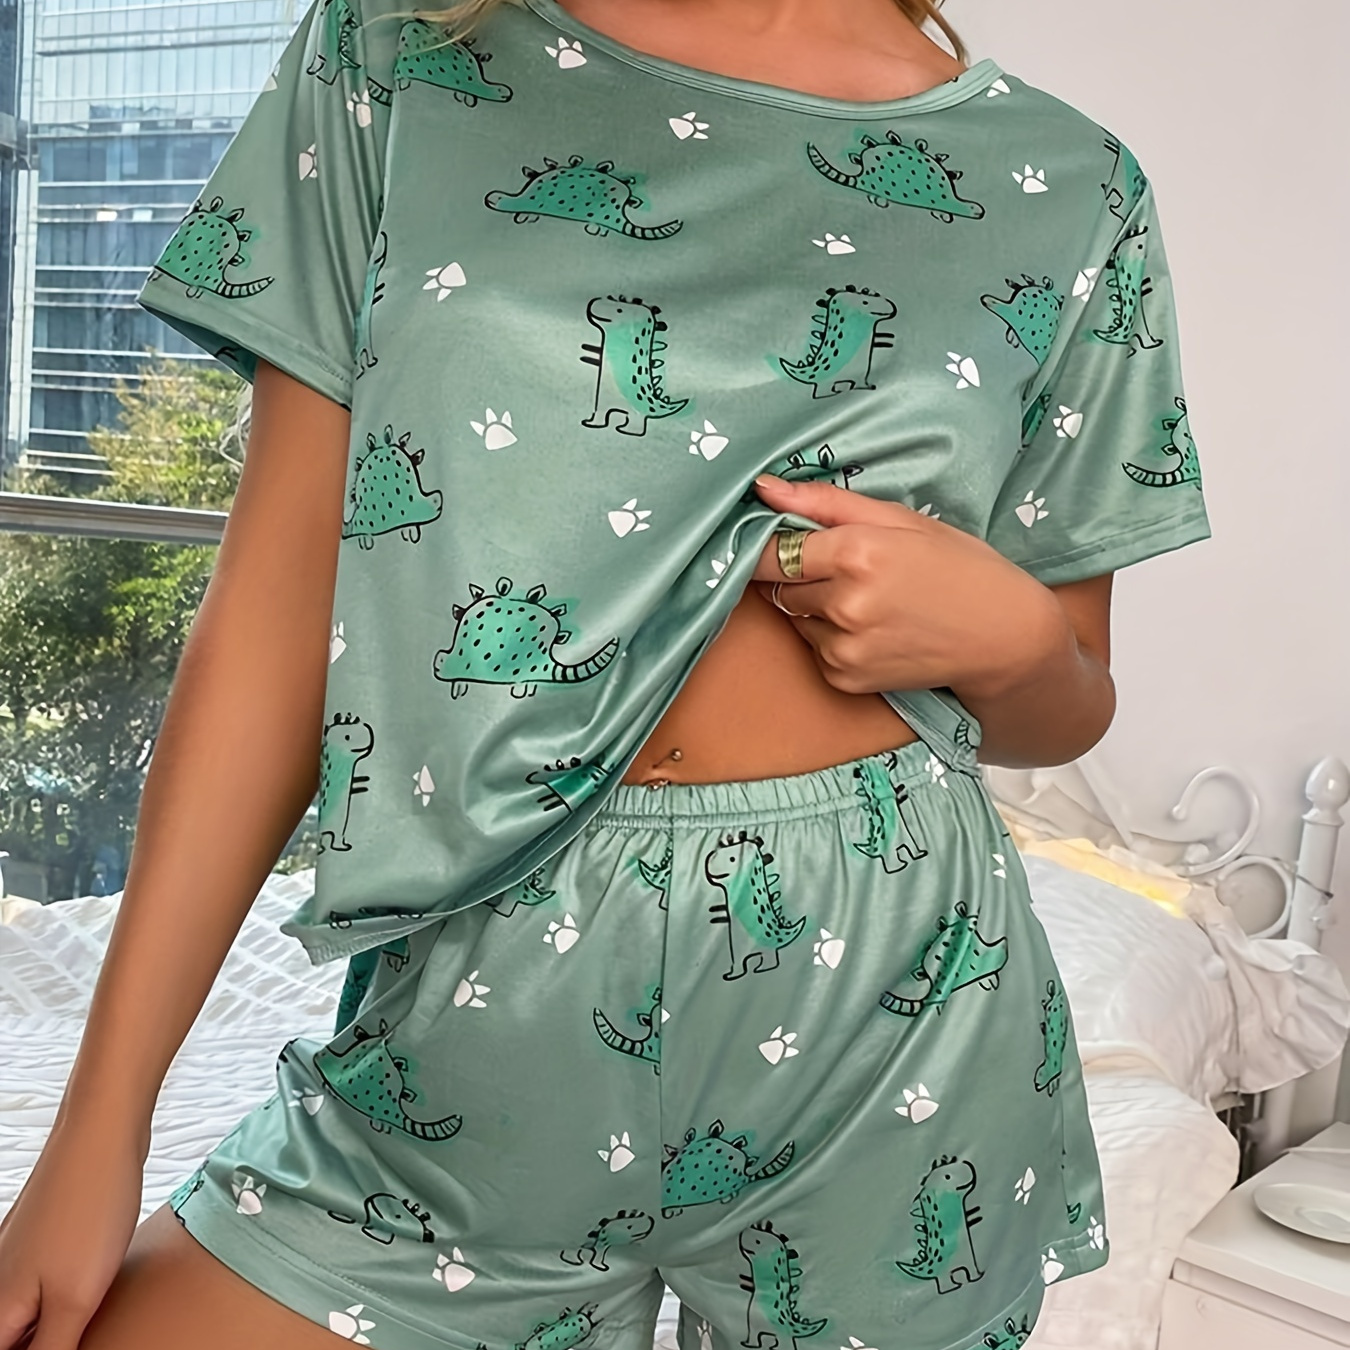 

Women's Cute Dinosaur Print Pajama Set, Short Sleeve Round Neck Top & Shorts, Comfortable Relaxed Fit